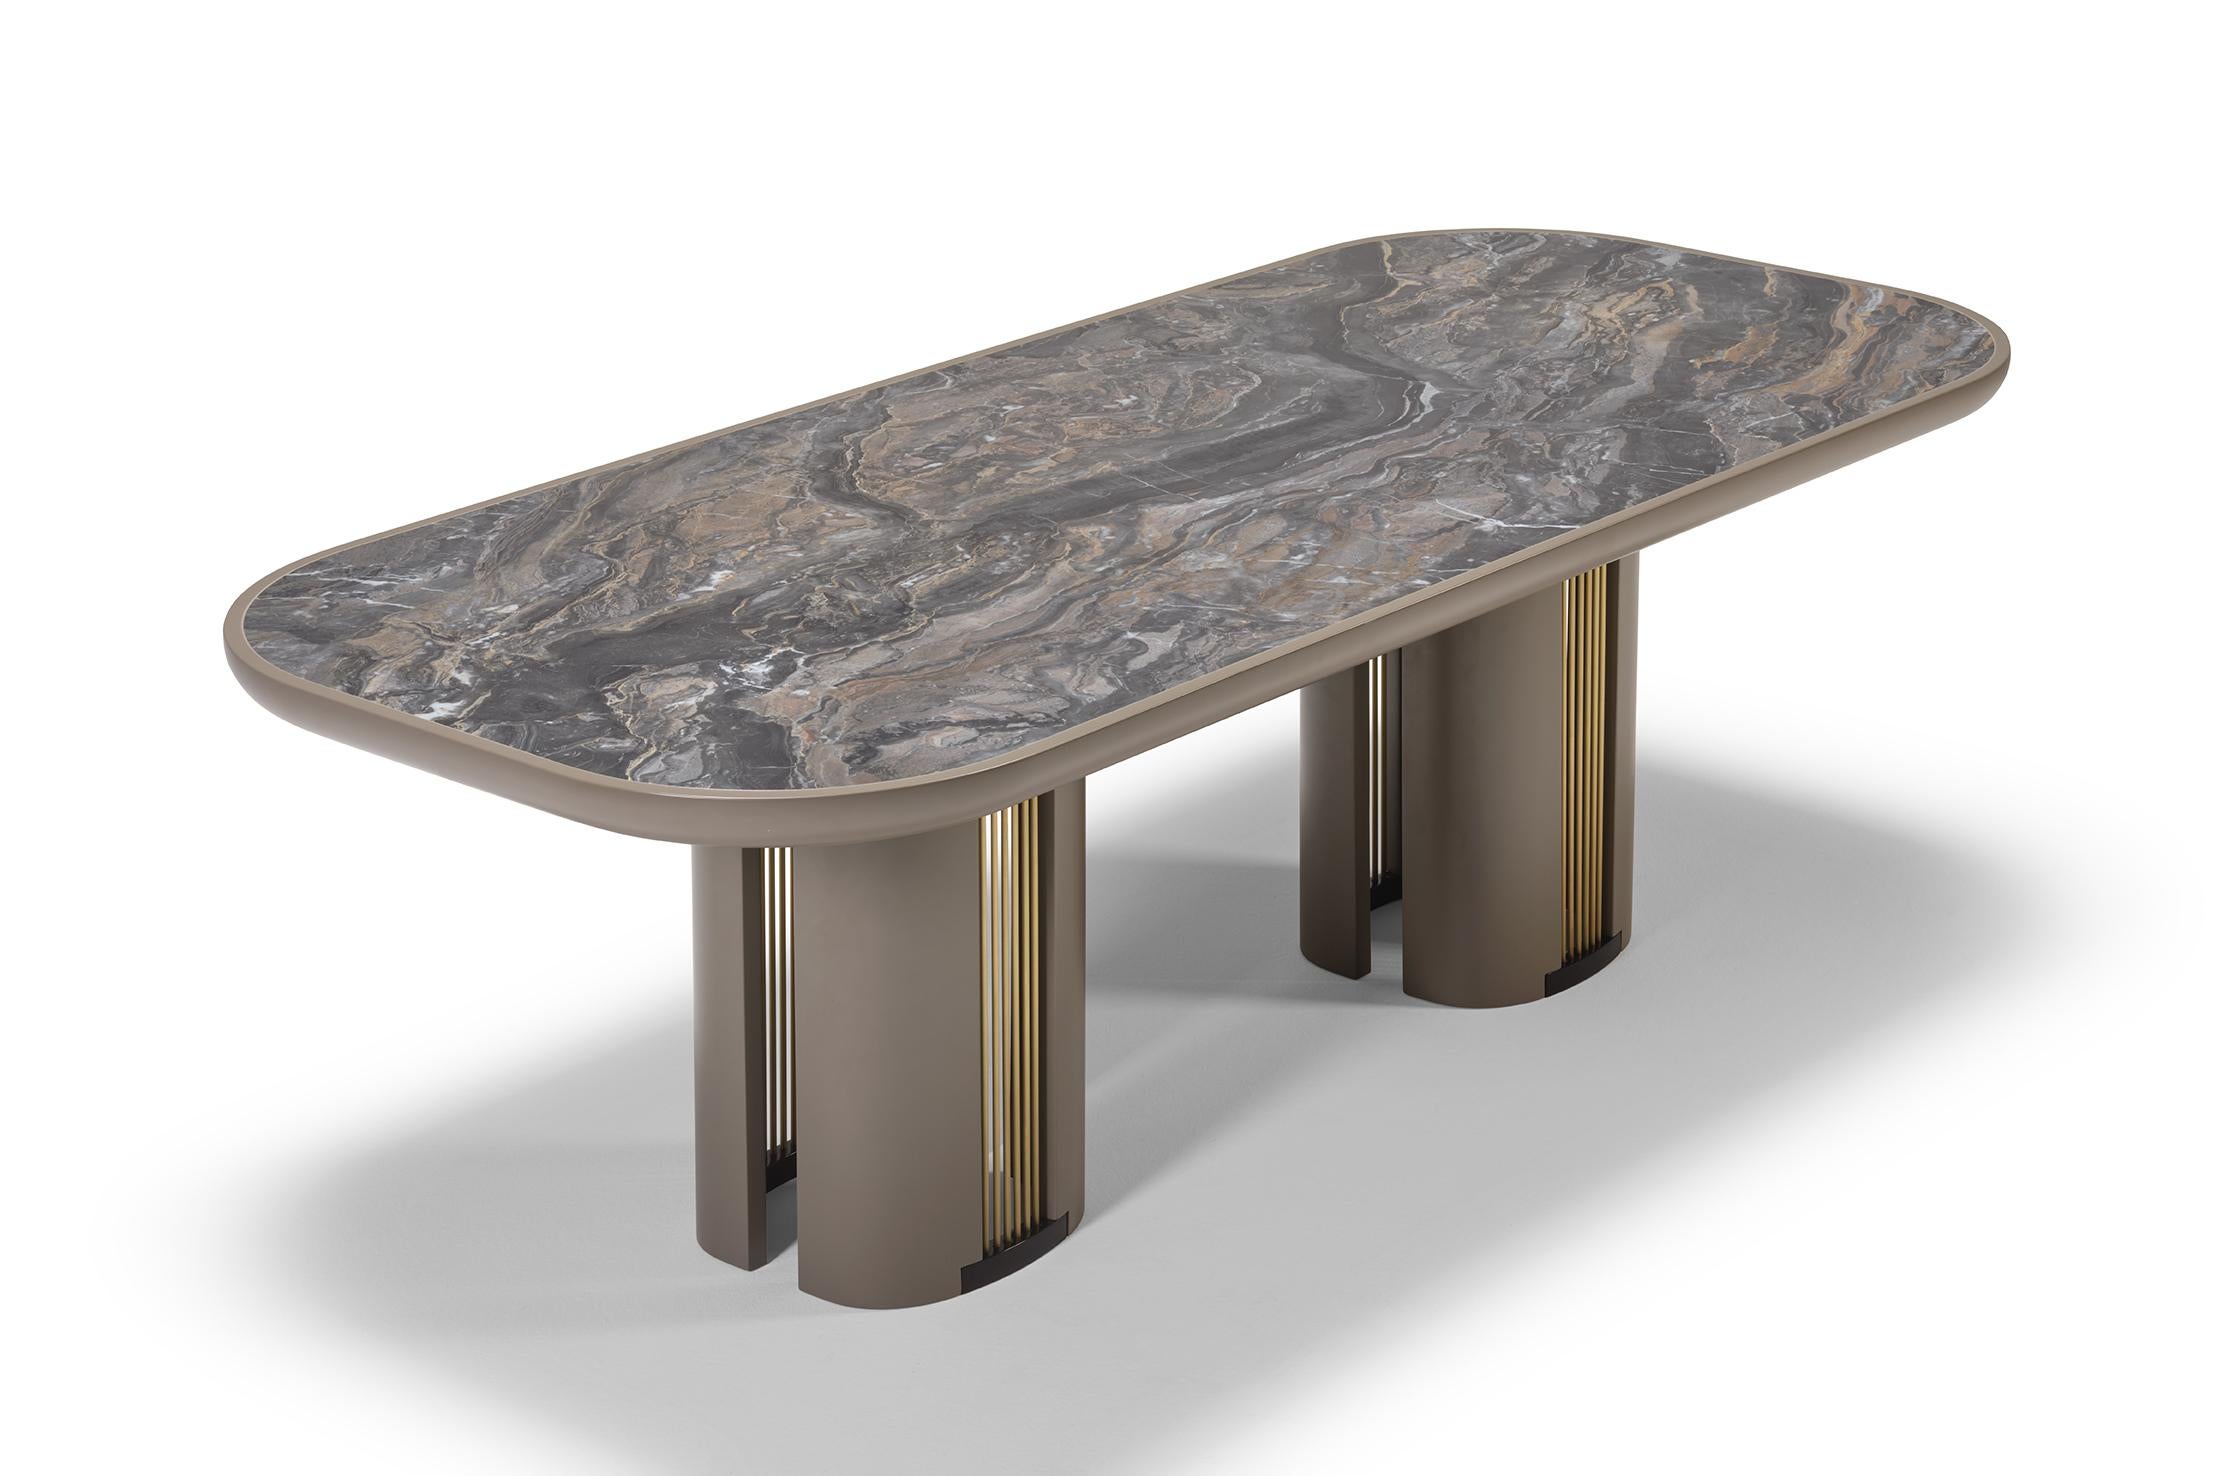 The distinctive BACALL is a very sensual dining table with a strong character. The full-bodied top, finished in ceramic, is settled on the well-gauged legs, which are embellished with the beauty of the brass details. Made of a wooden structure,